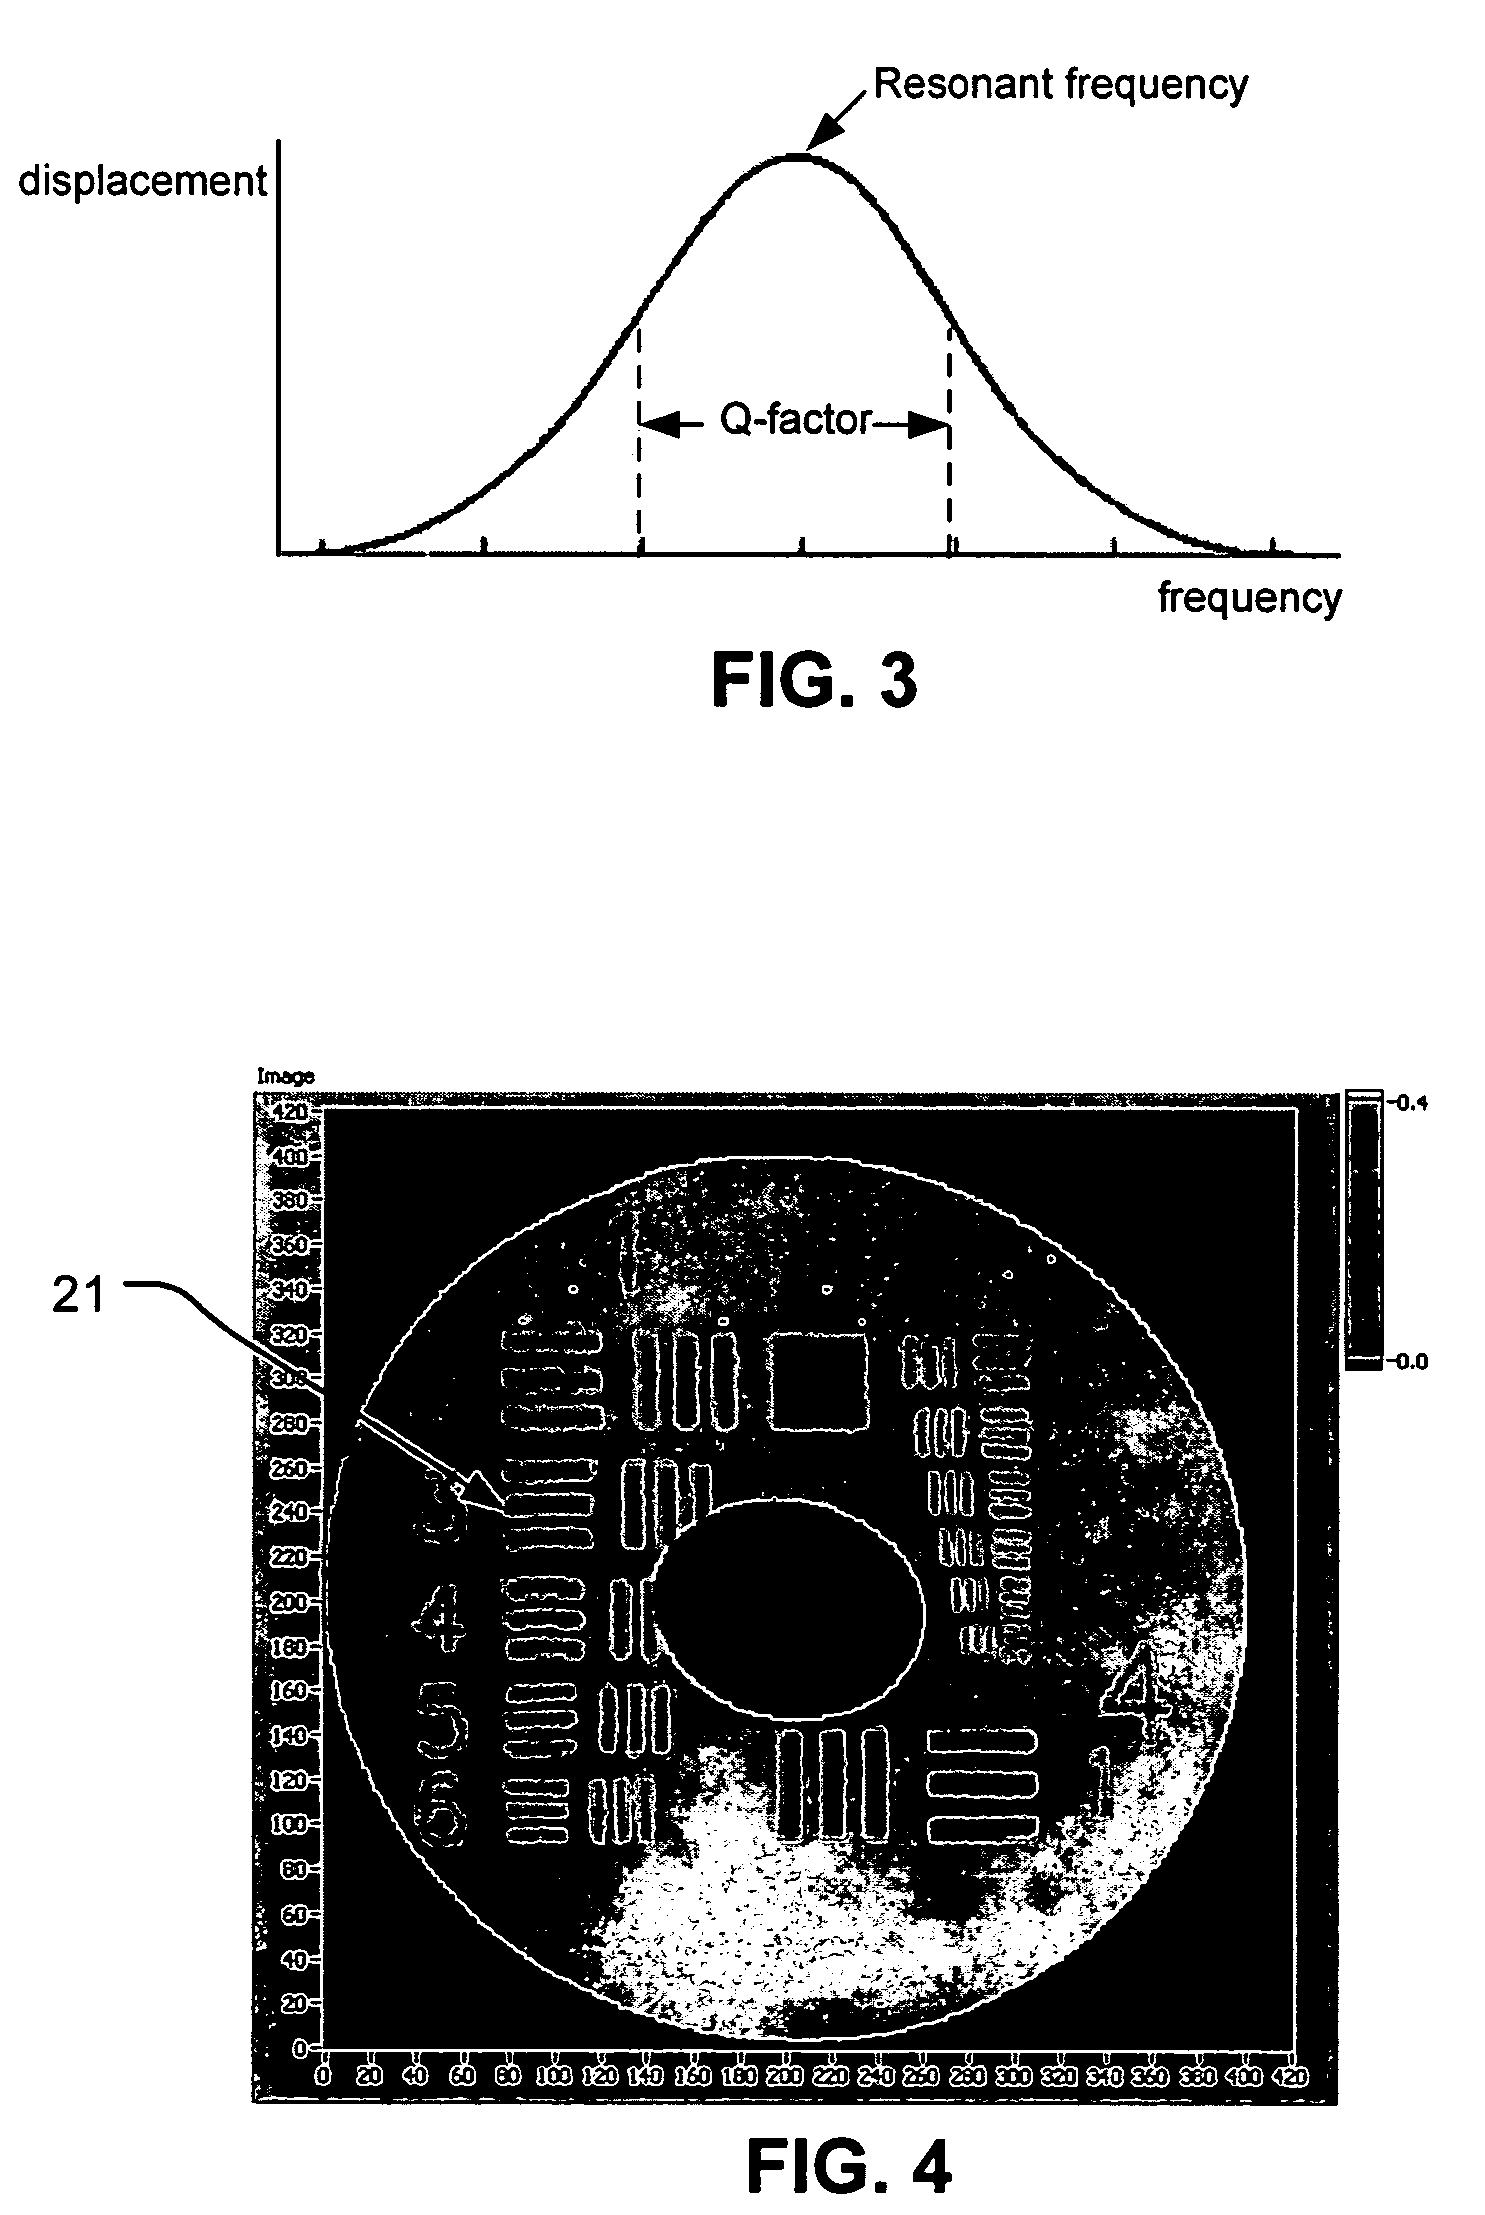 Methods of driving a scanning beam device to achieve high frame rates